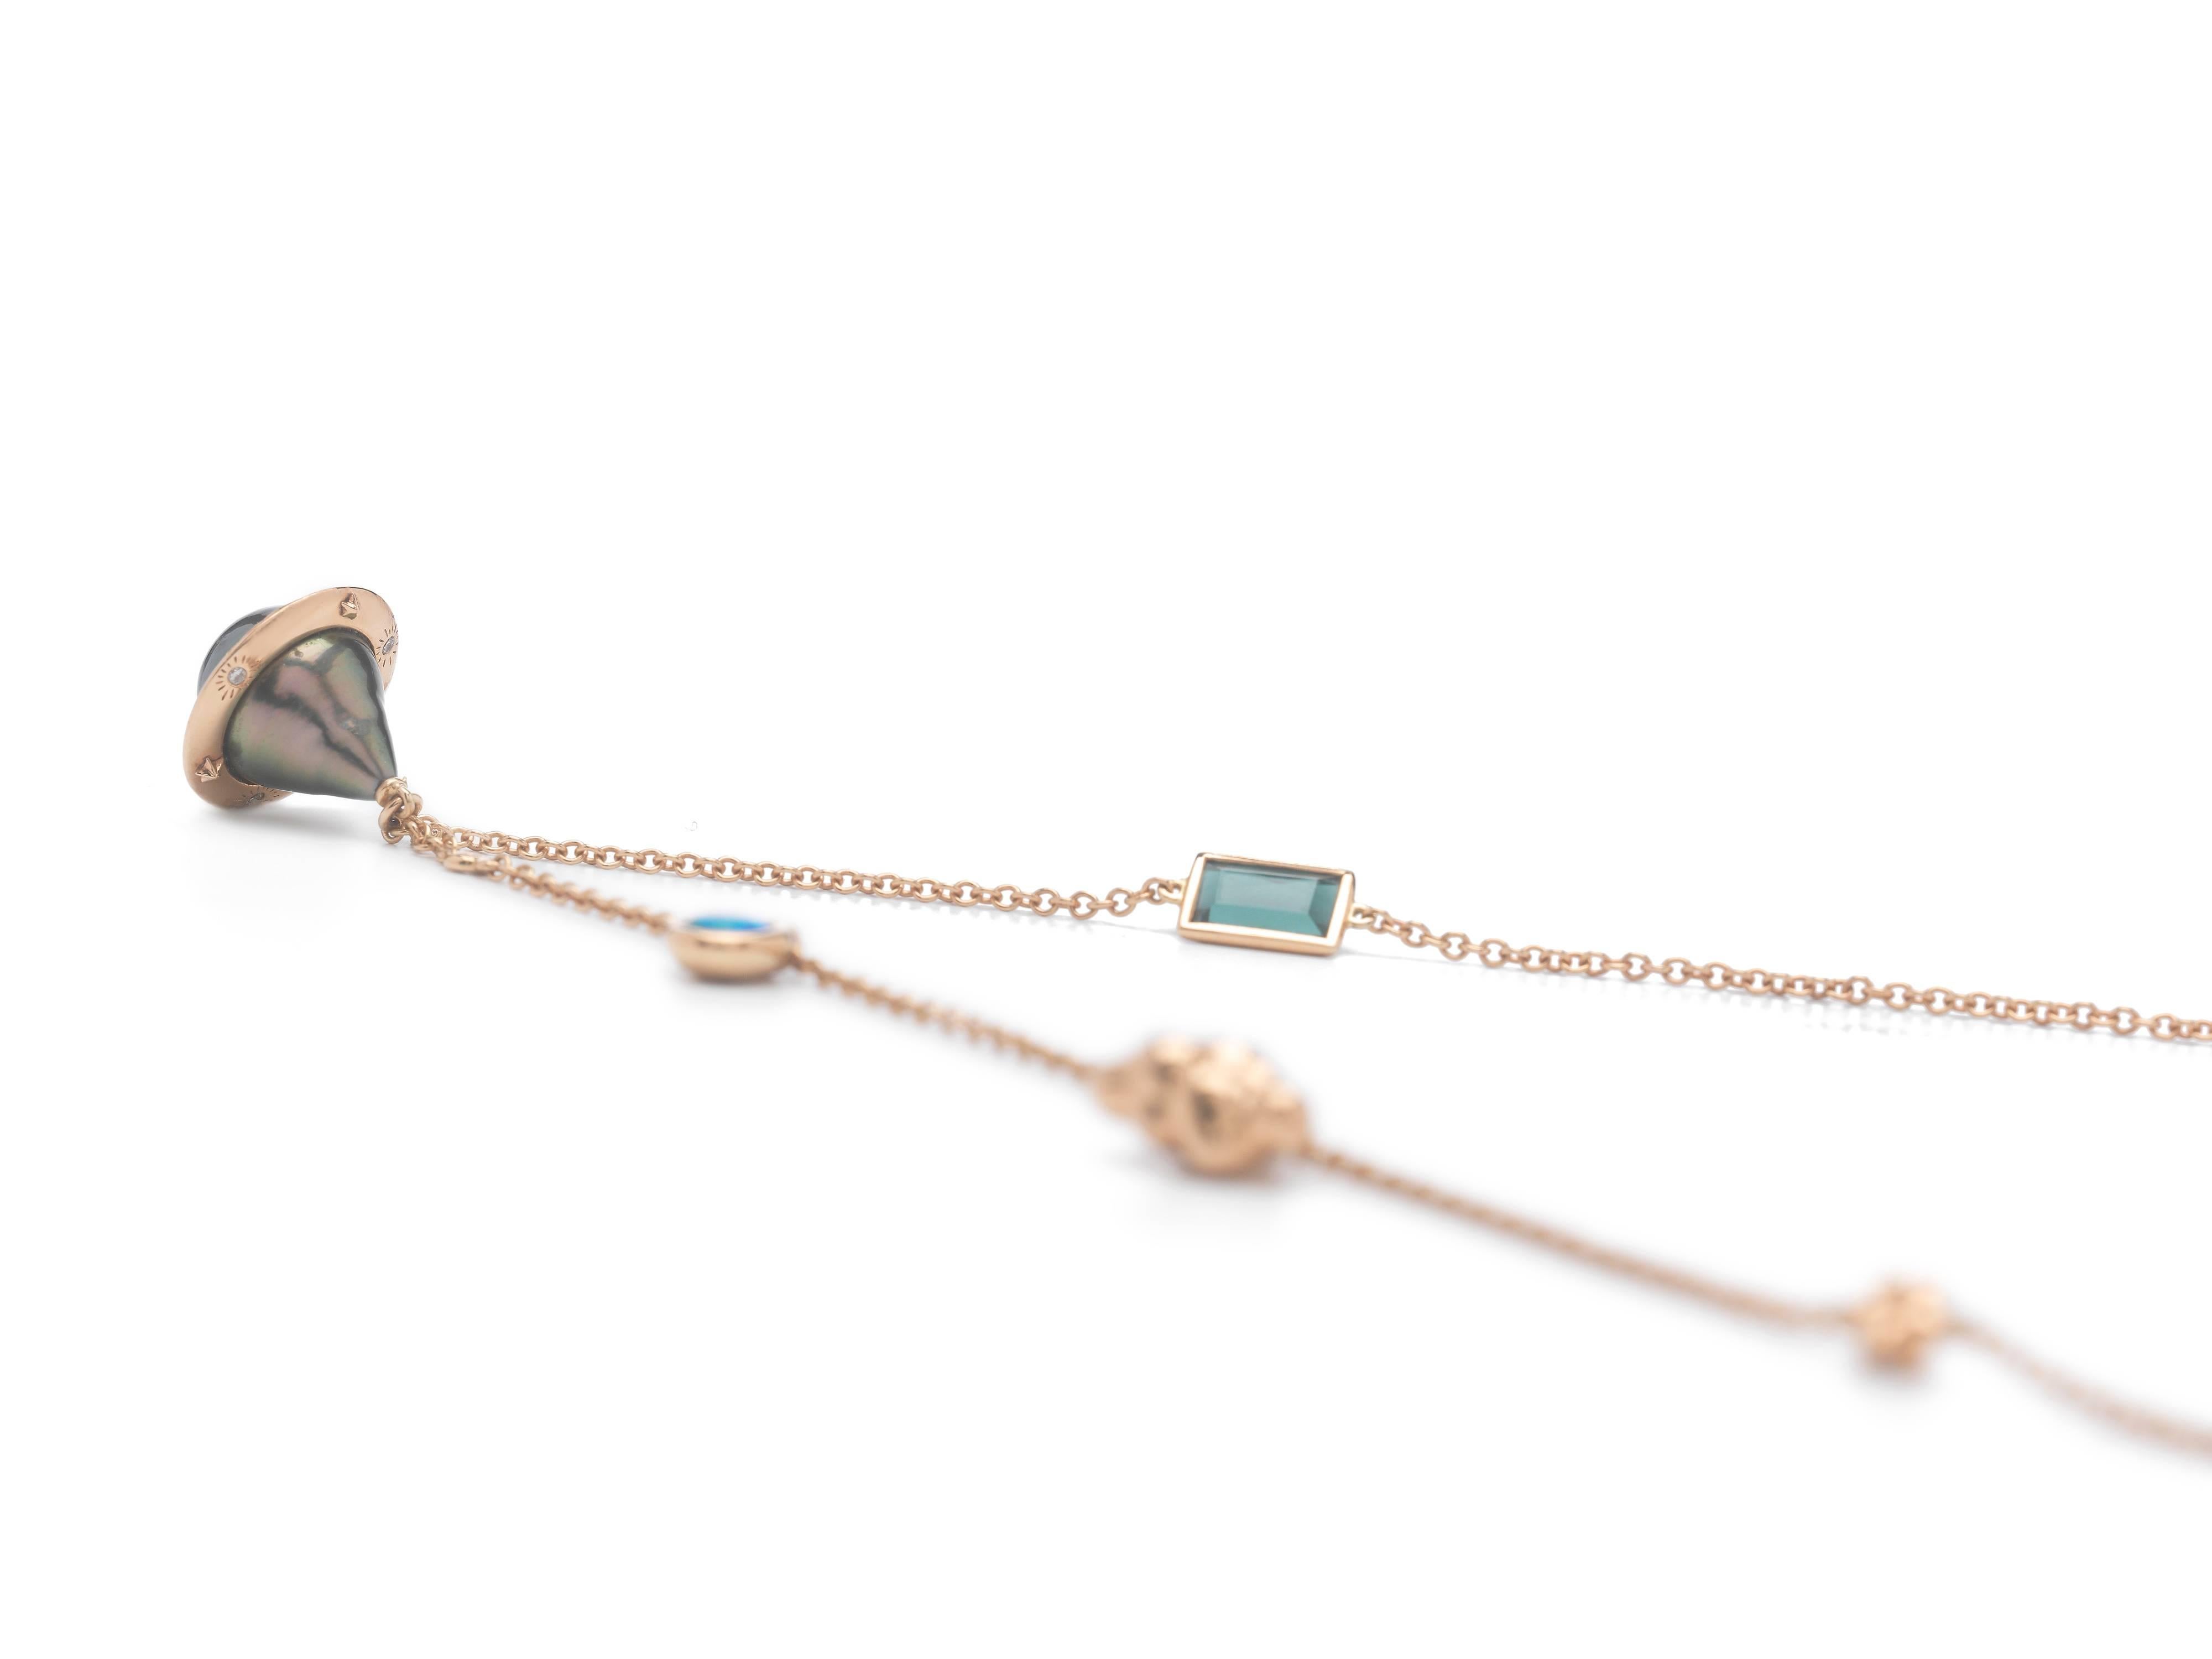 The Small Planet Necklace, by Bibi van der Velden, is made of 18k Rose Gold, and features a Tahitian drop pearl, wrapped by a gold planet ring set with diamonds and blue sapphires. The necklace chain features a tourmaline, opal, and 18k stars and